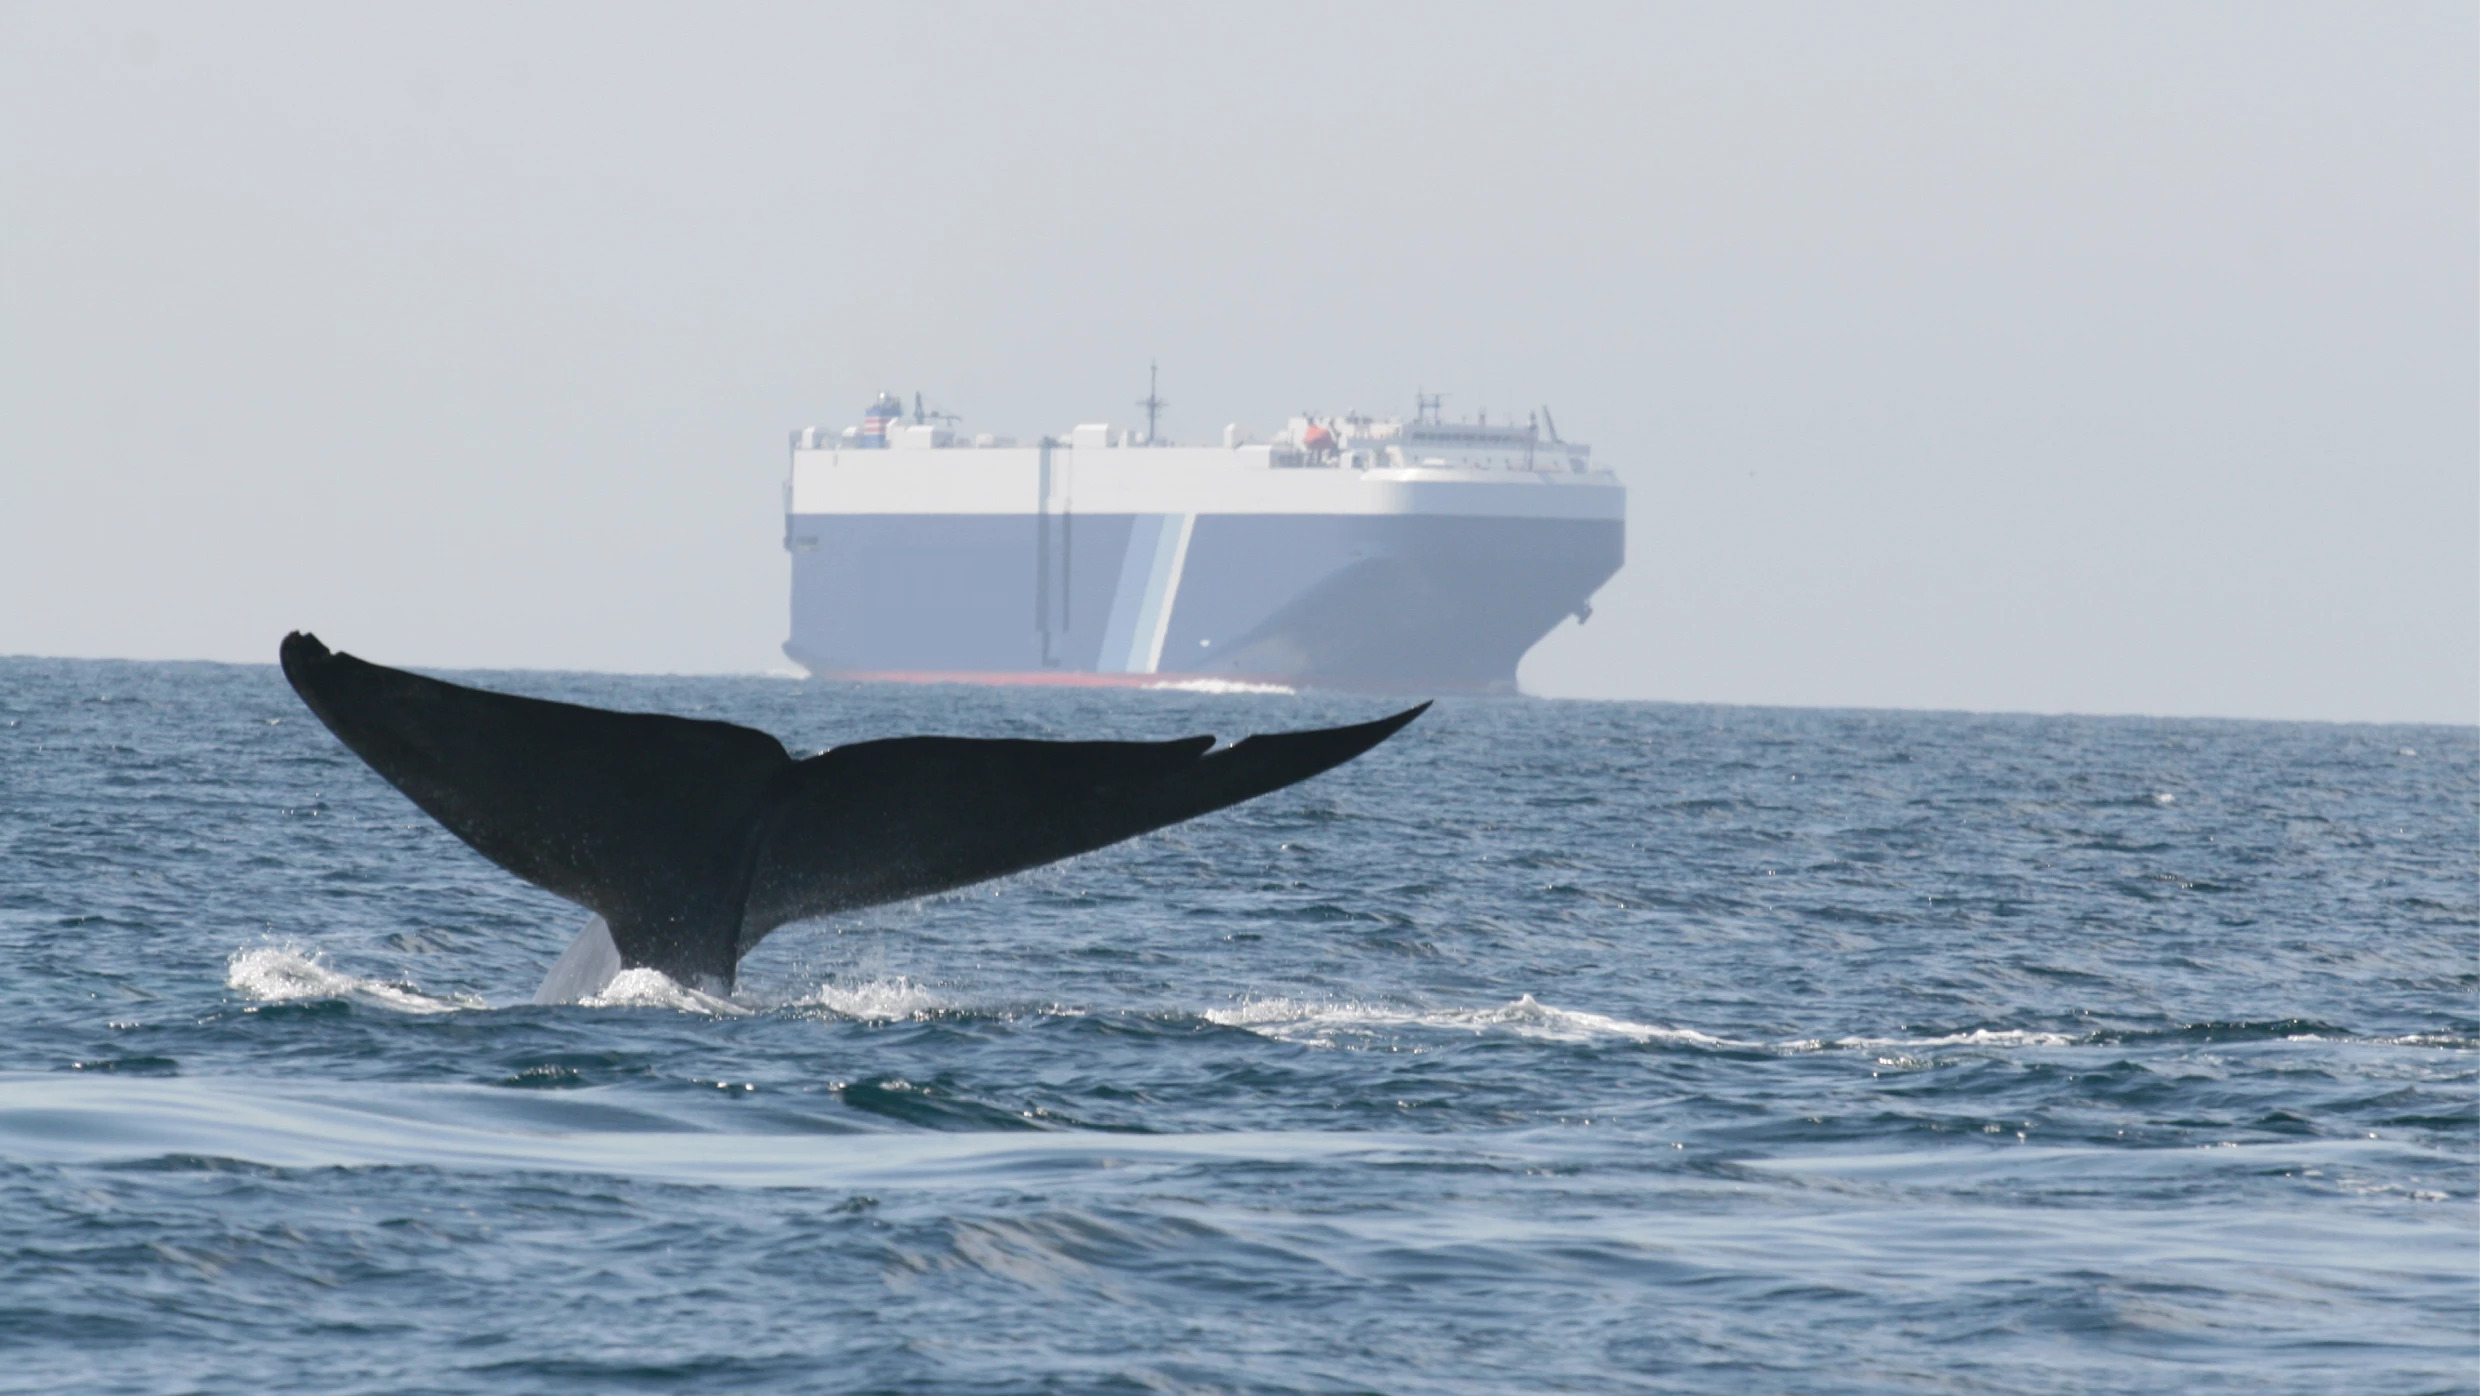 a large whale tail about to submerge into the water. a large container ship looms in the background